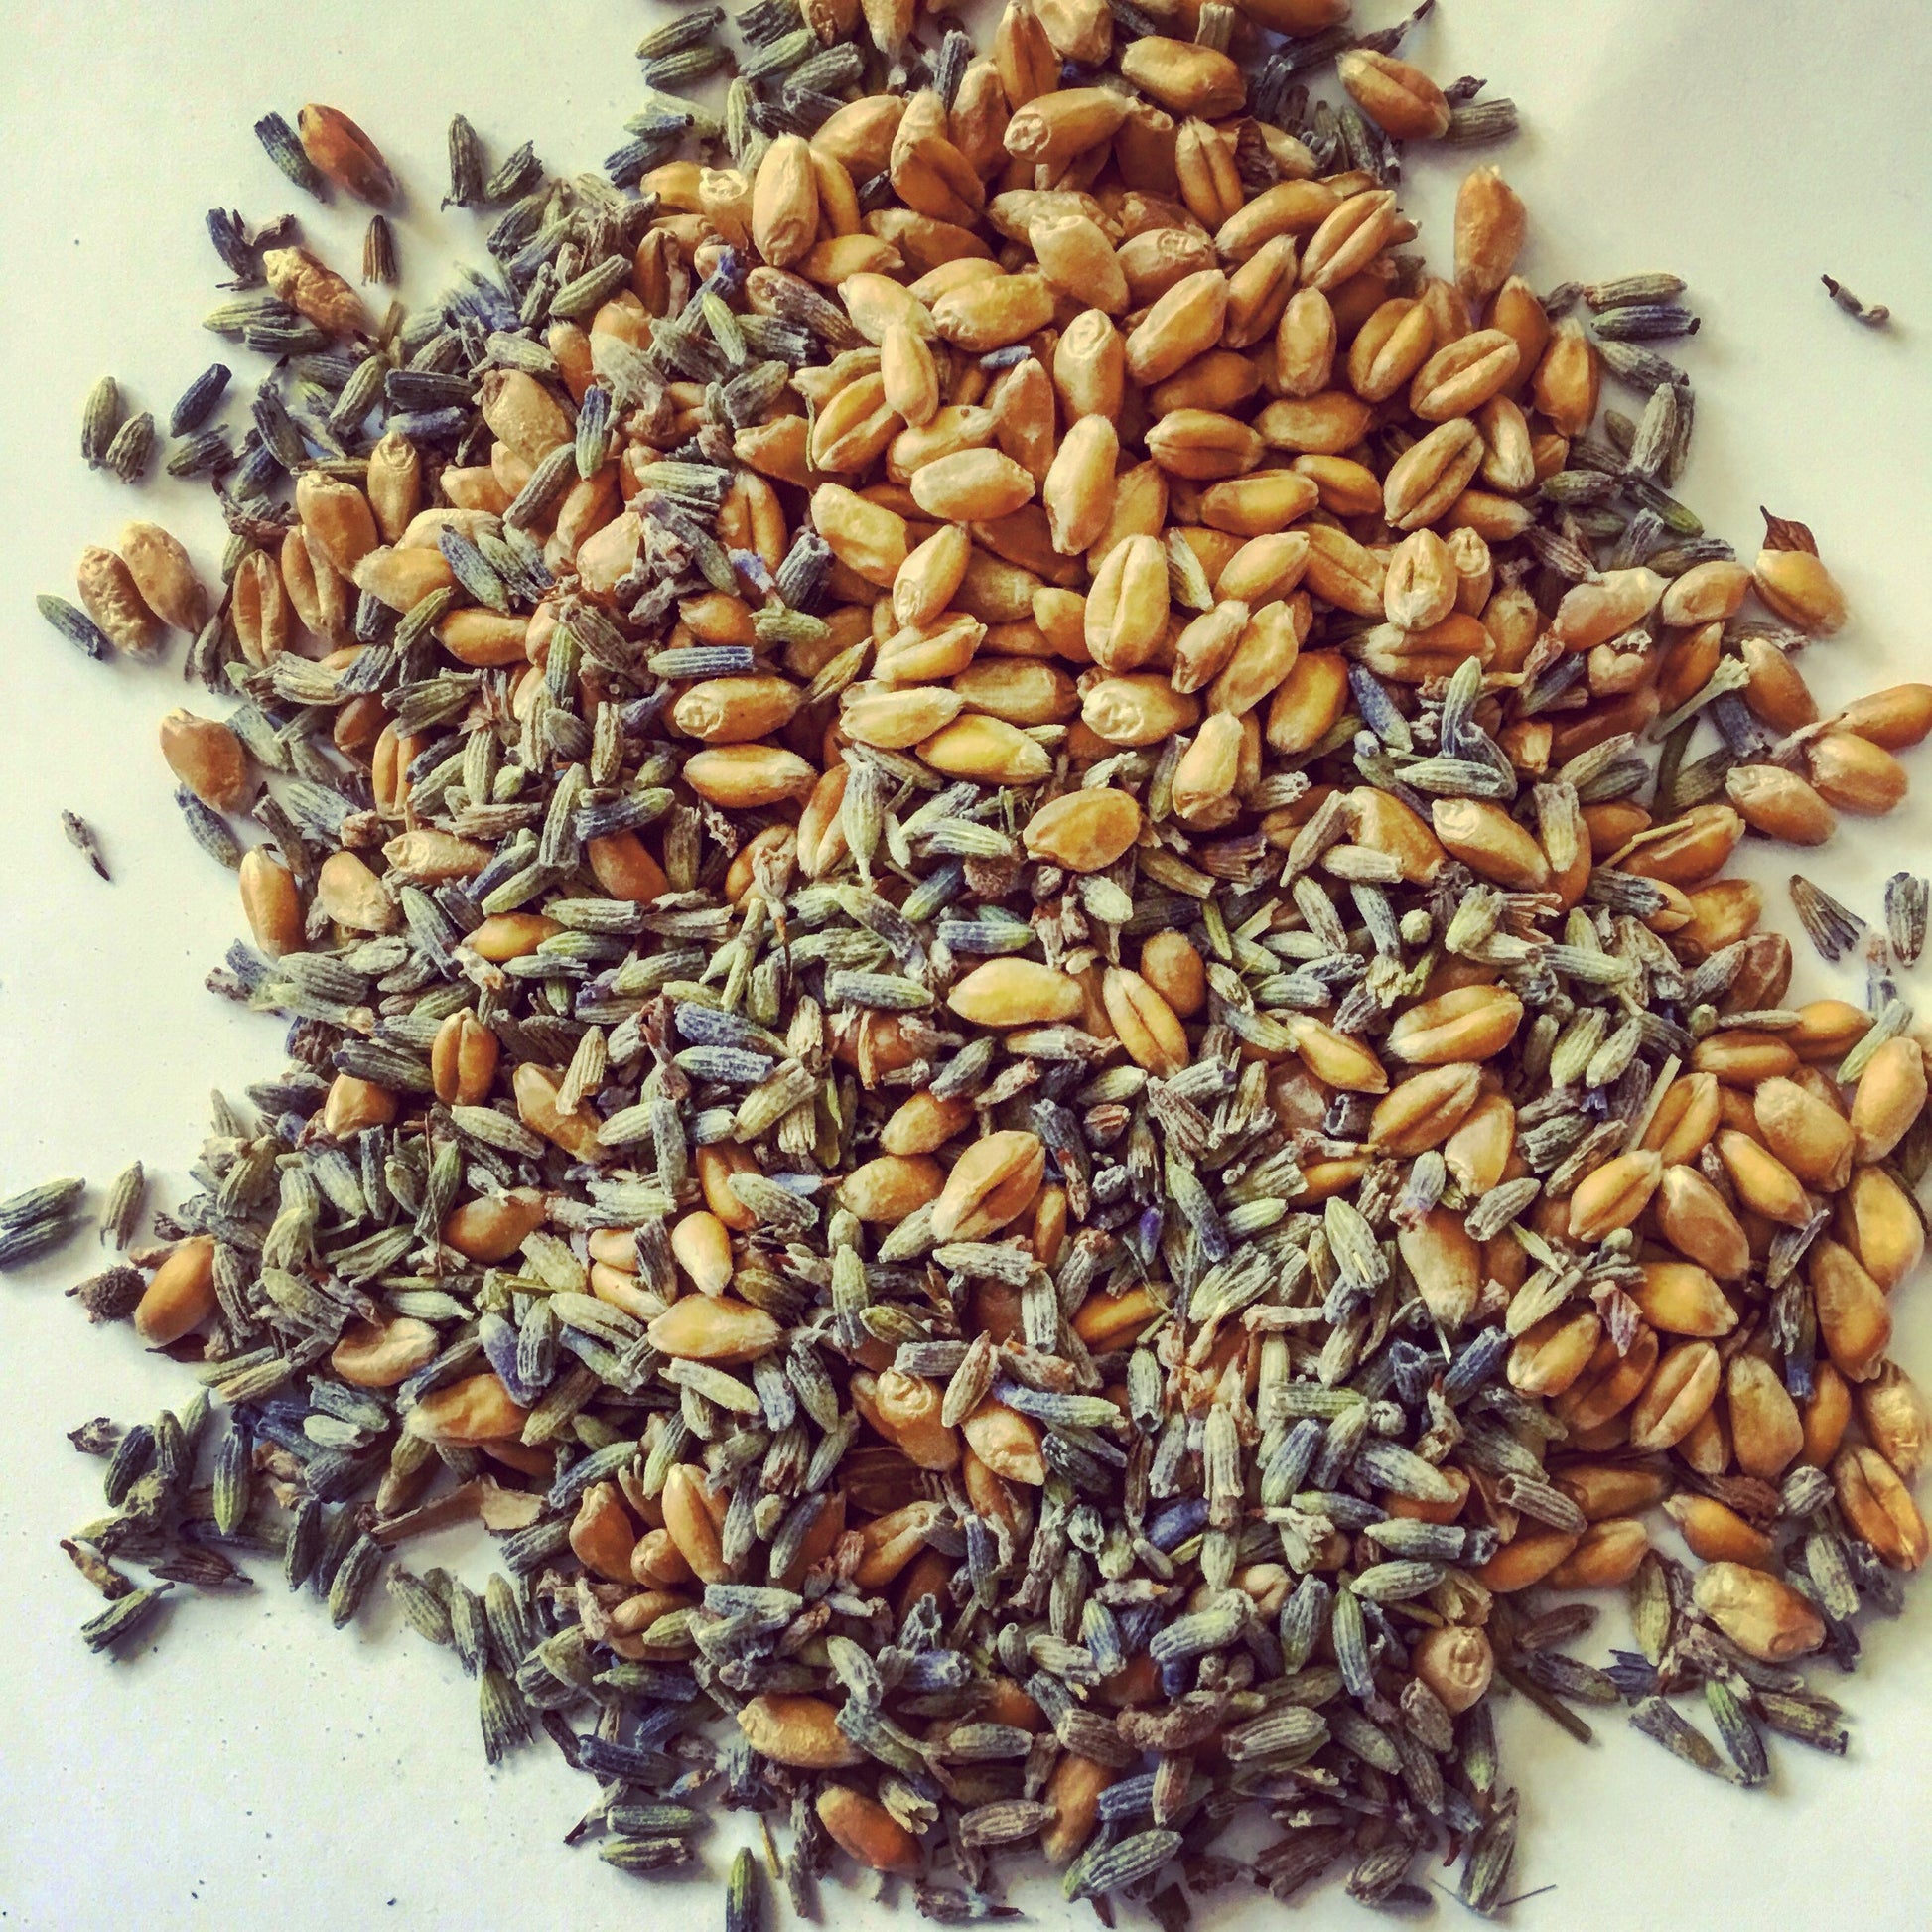 lavender and wheat filling for WheatBagHeaven wheat bags and body warmers, natural locally sourced ingredients 